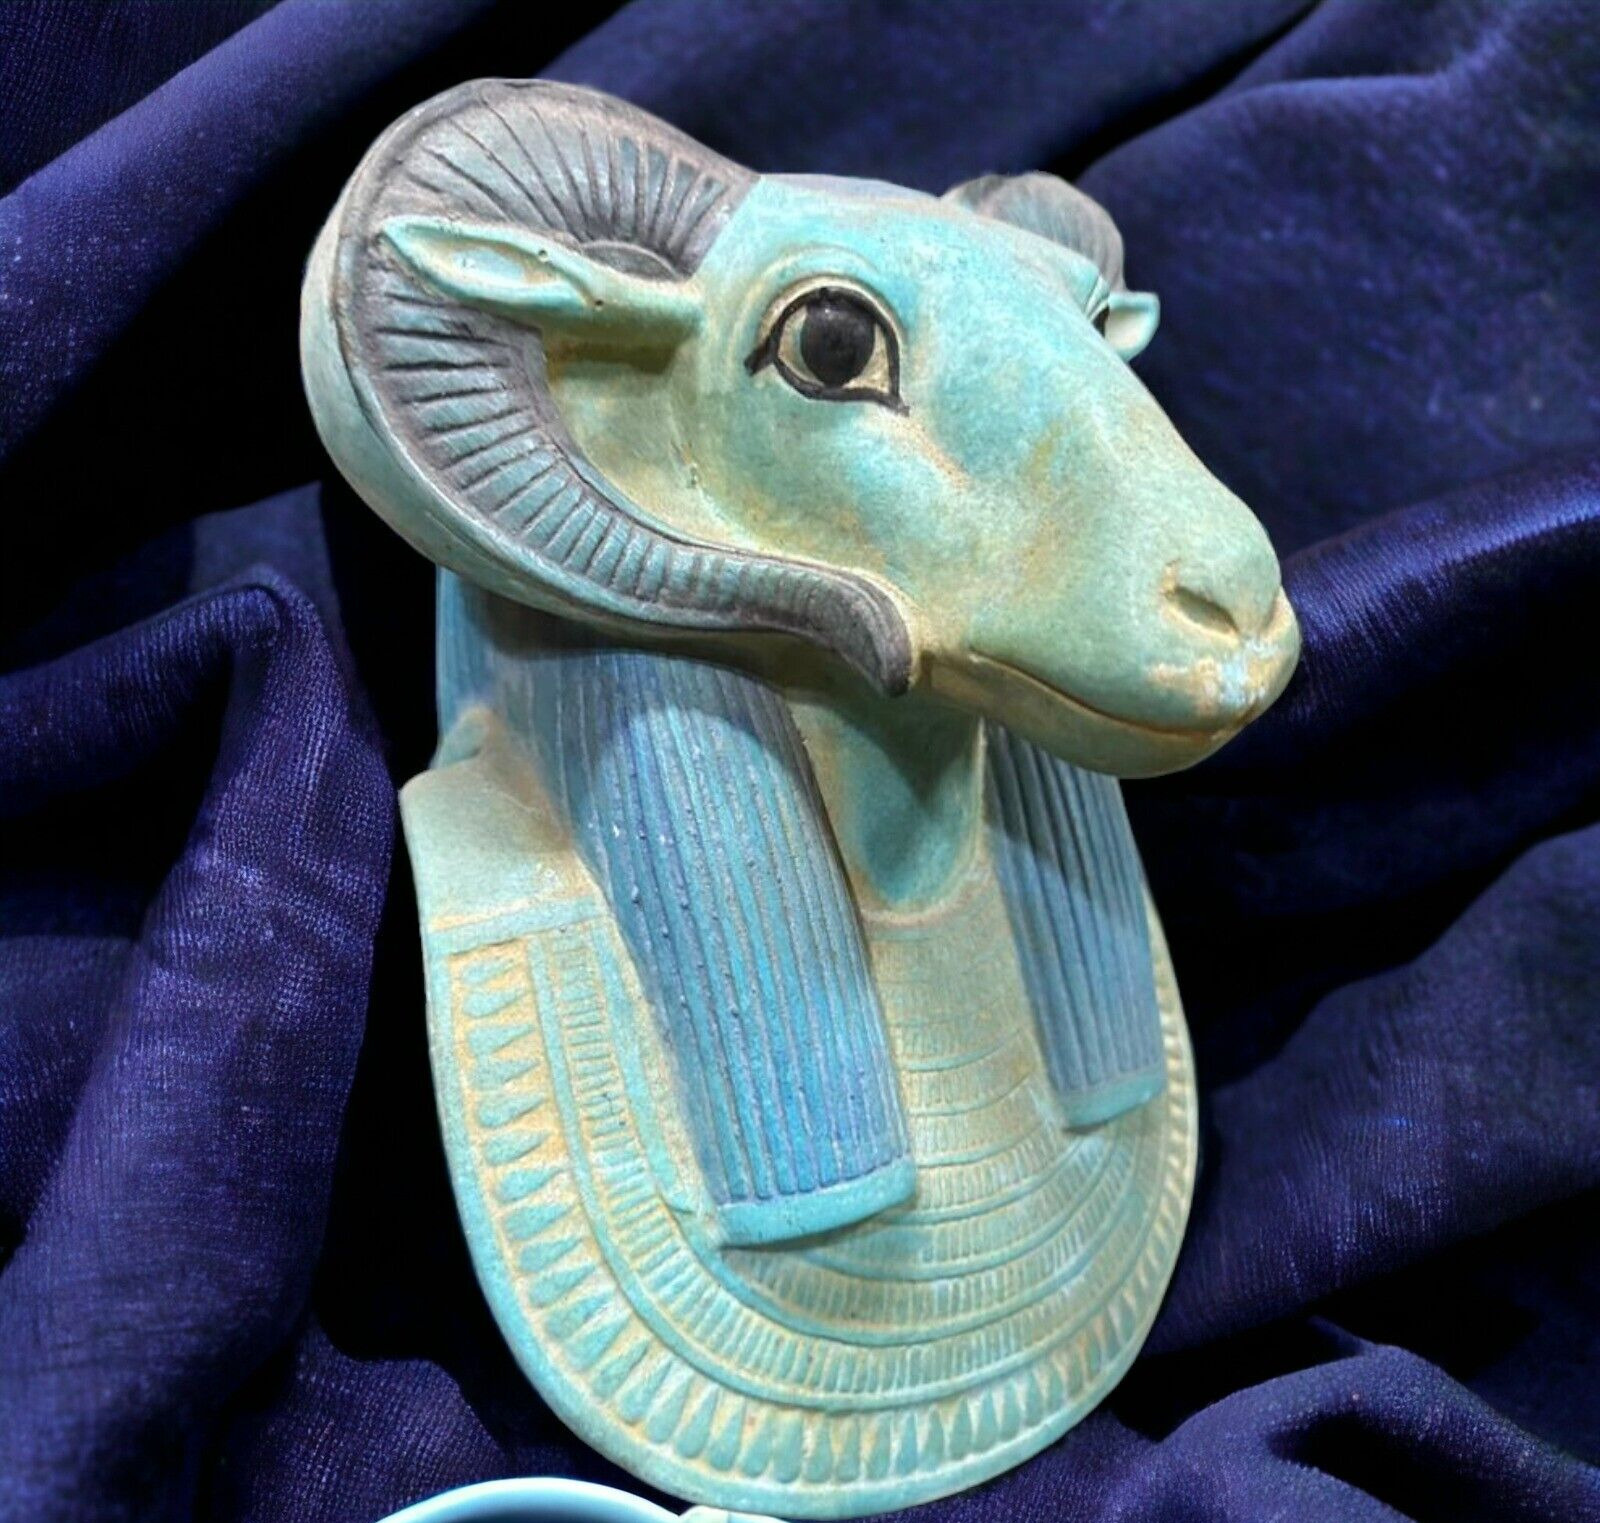 Rare Ancient Egyptian Artifacts Head Khnum God of Water Egyptian Pharaonic BC